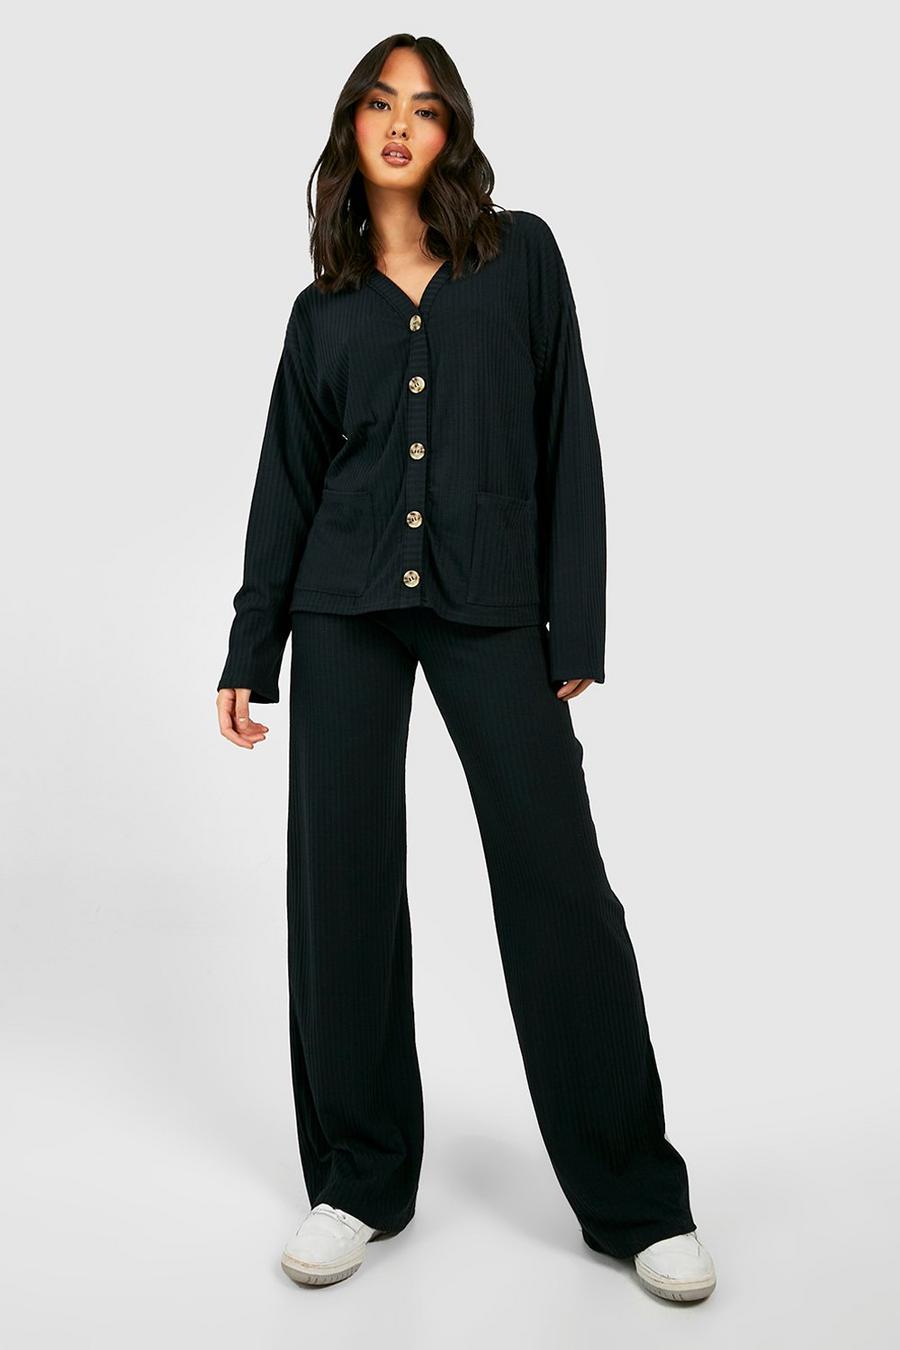 Black Rib Knit Buttoned Cardigan & Trouser Co-ord